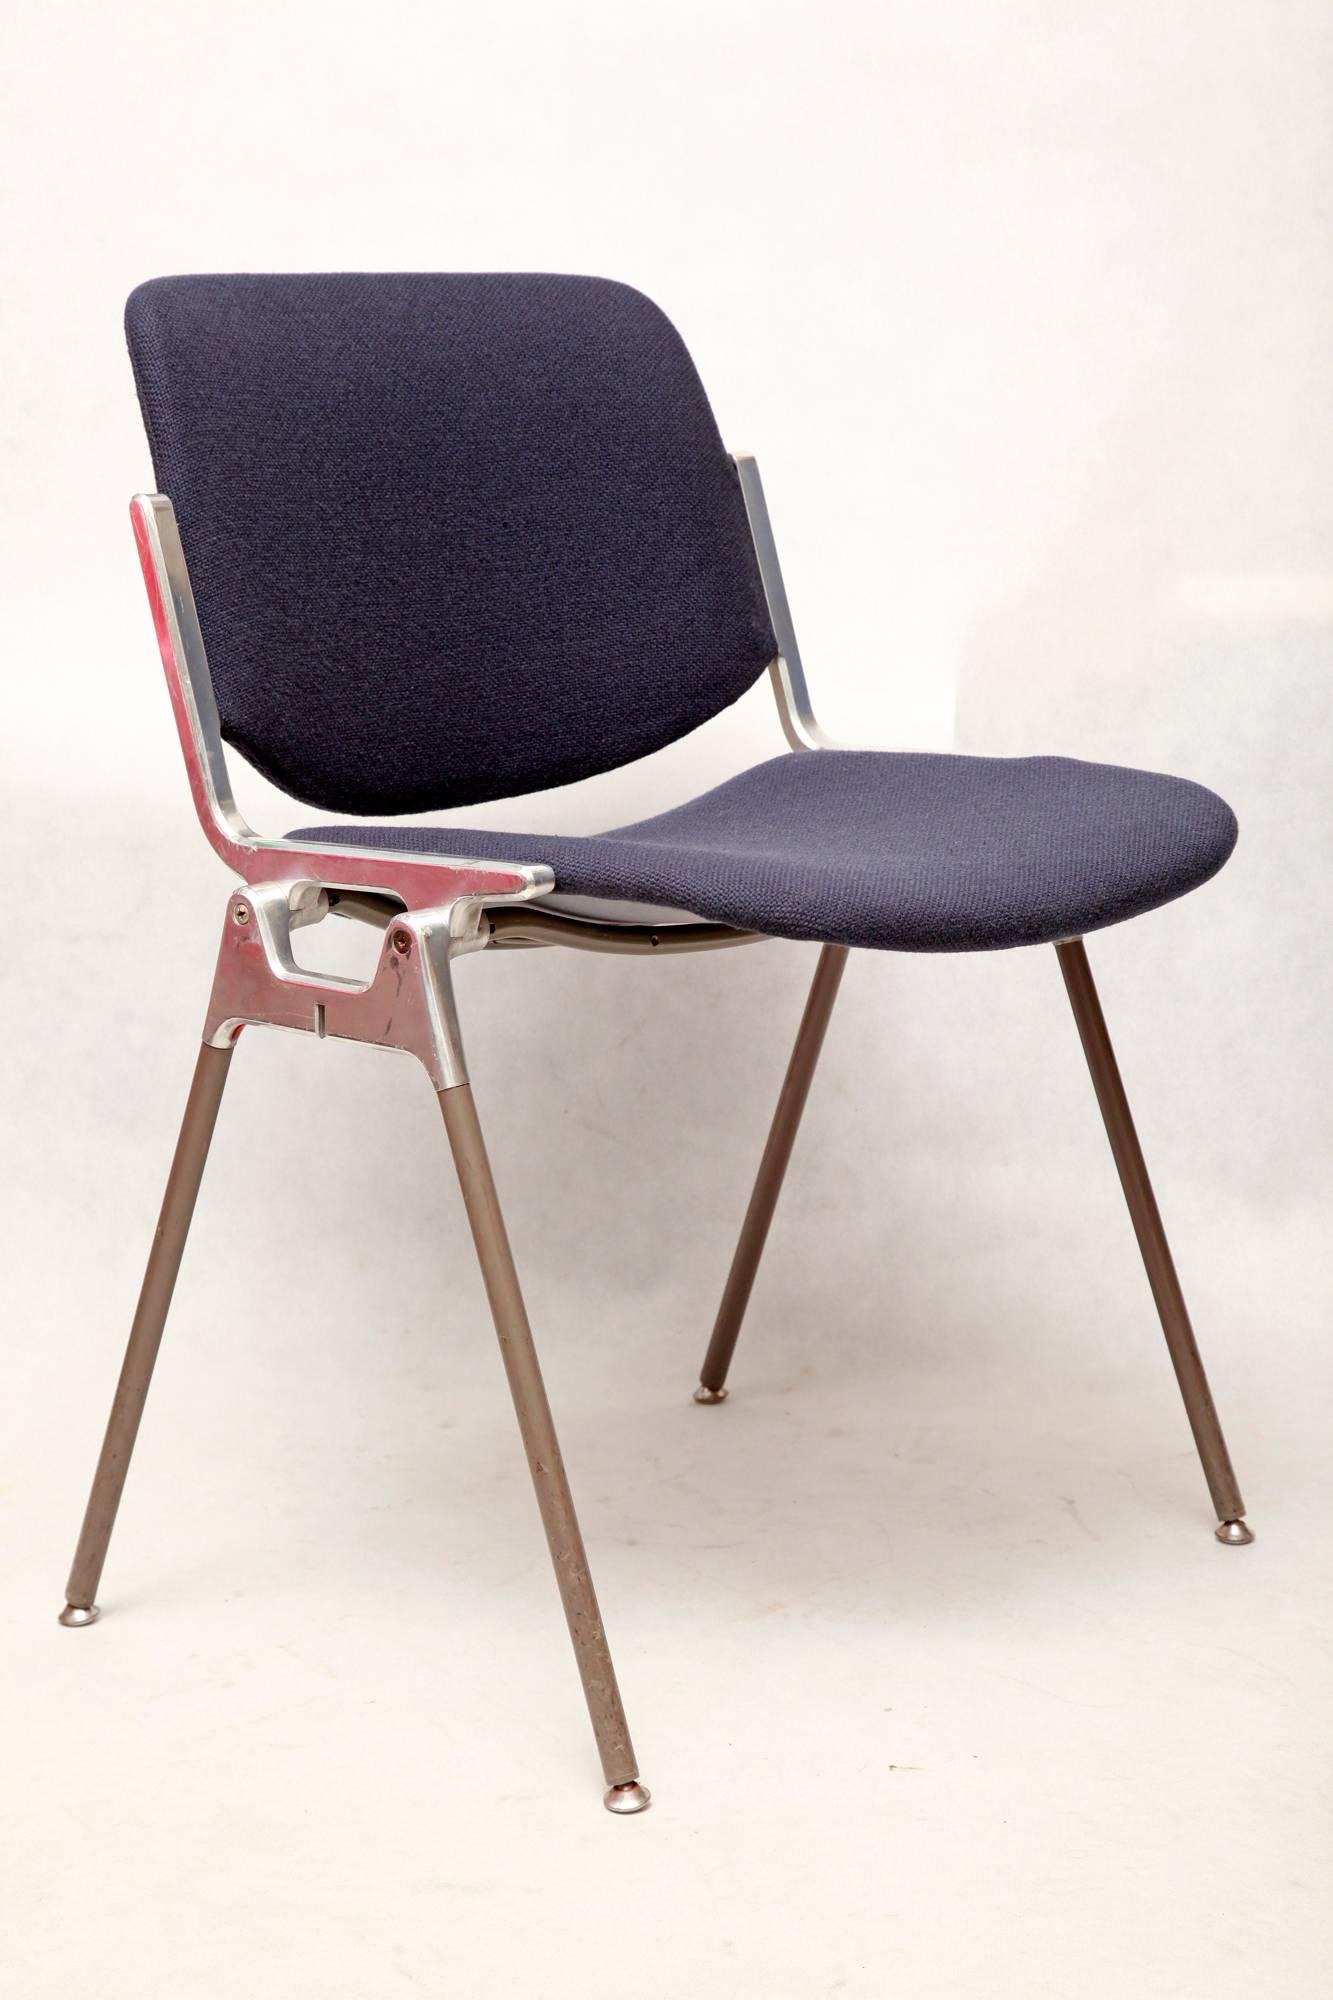 Set of six DSC 106 Rainbow stacking chairs, designed in 1965 with original navy blue fabric, perfect for use as dining chairs and office chairs. Frame polished aluminium, the legs are coated in plastic. Original upholstery is in very good vintage